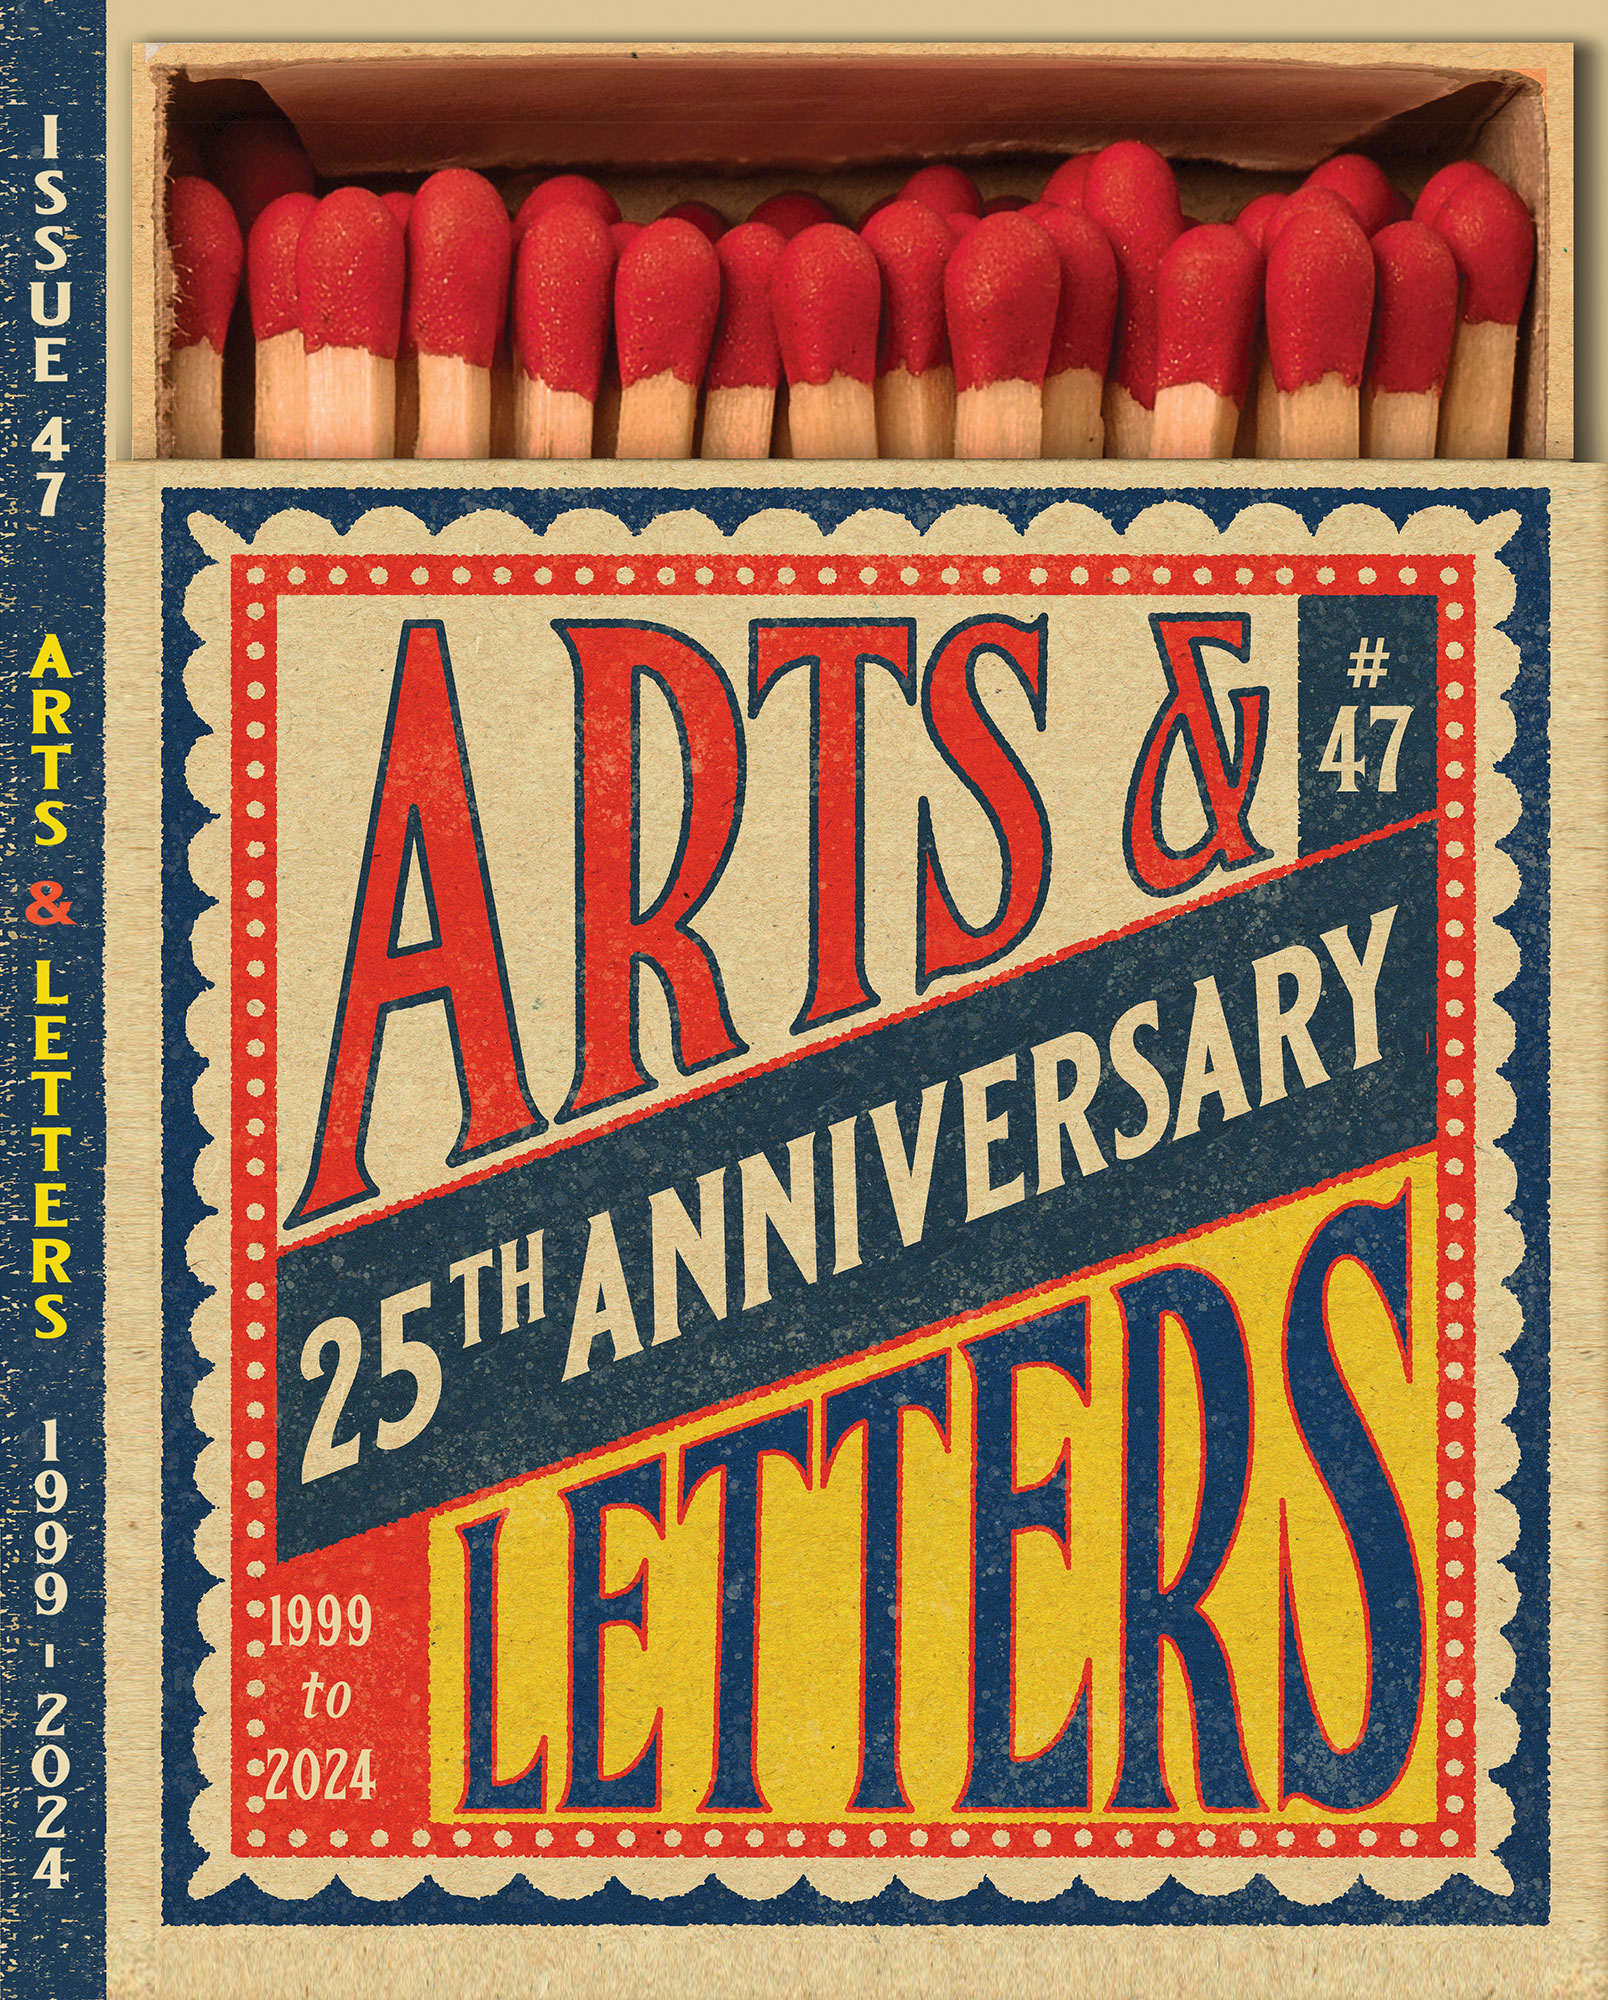 Arts & Letters, Issue 47 Cover + Spine